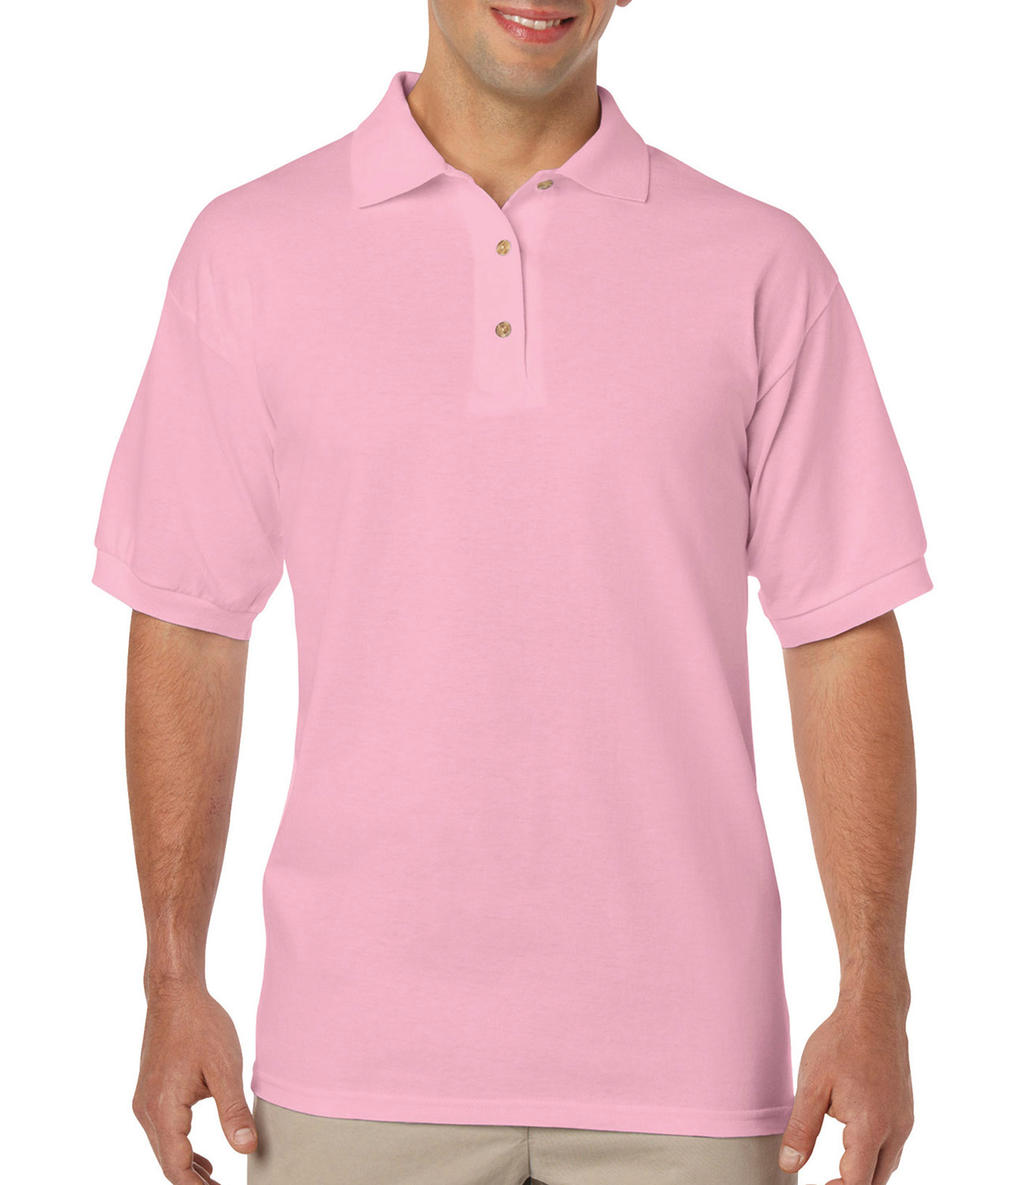  DryBlend Adult Jersey Polo in Farbe Light Pink